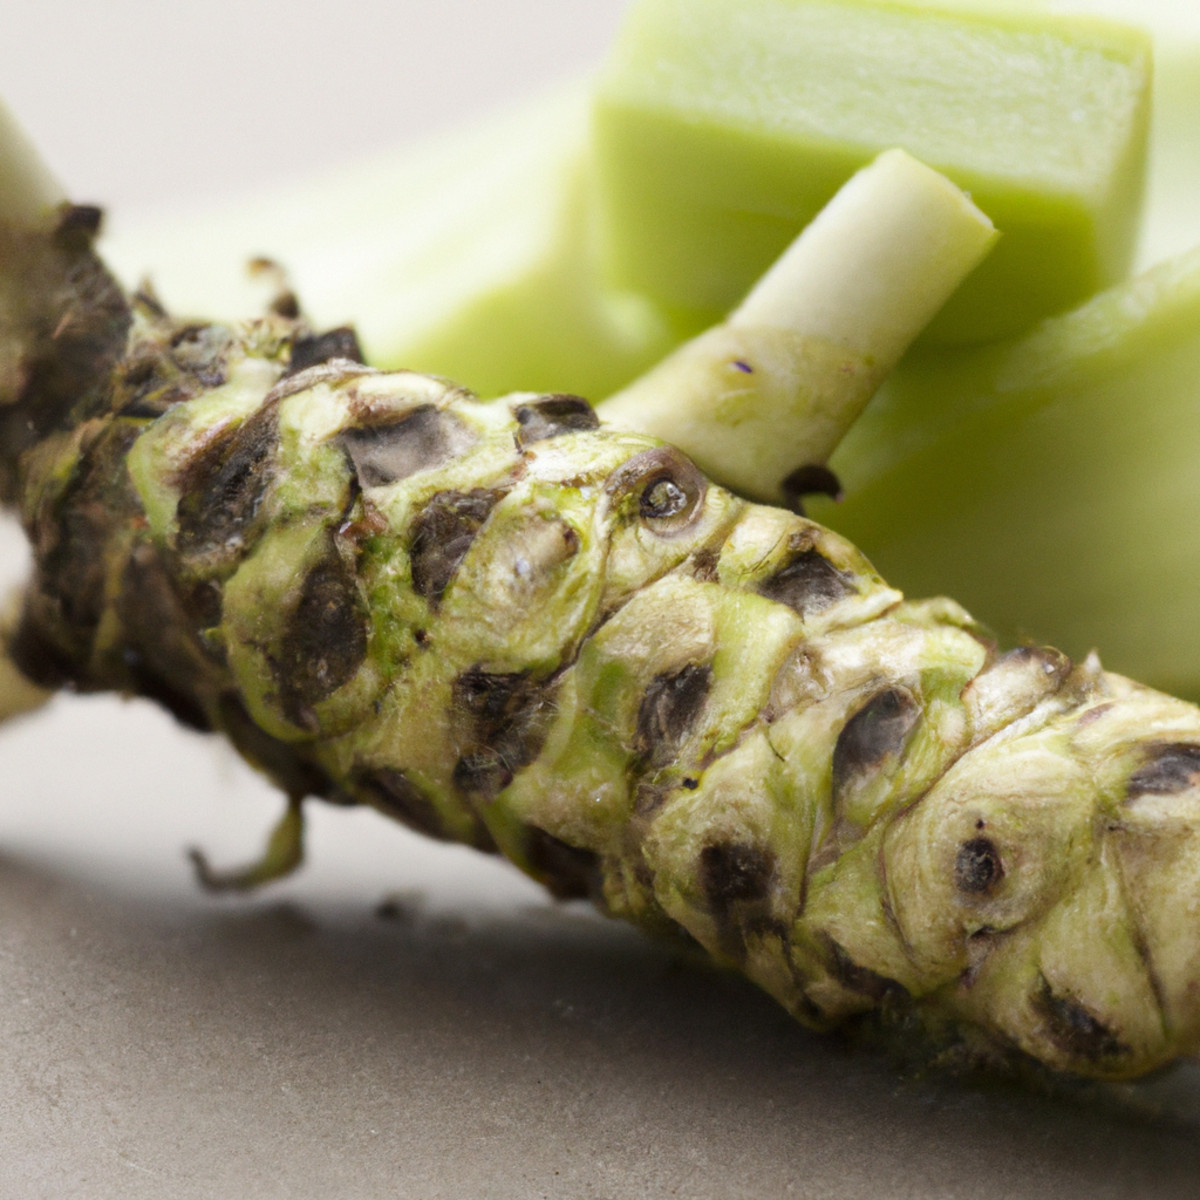 Wasabi root with cut wasabi root cubes